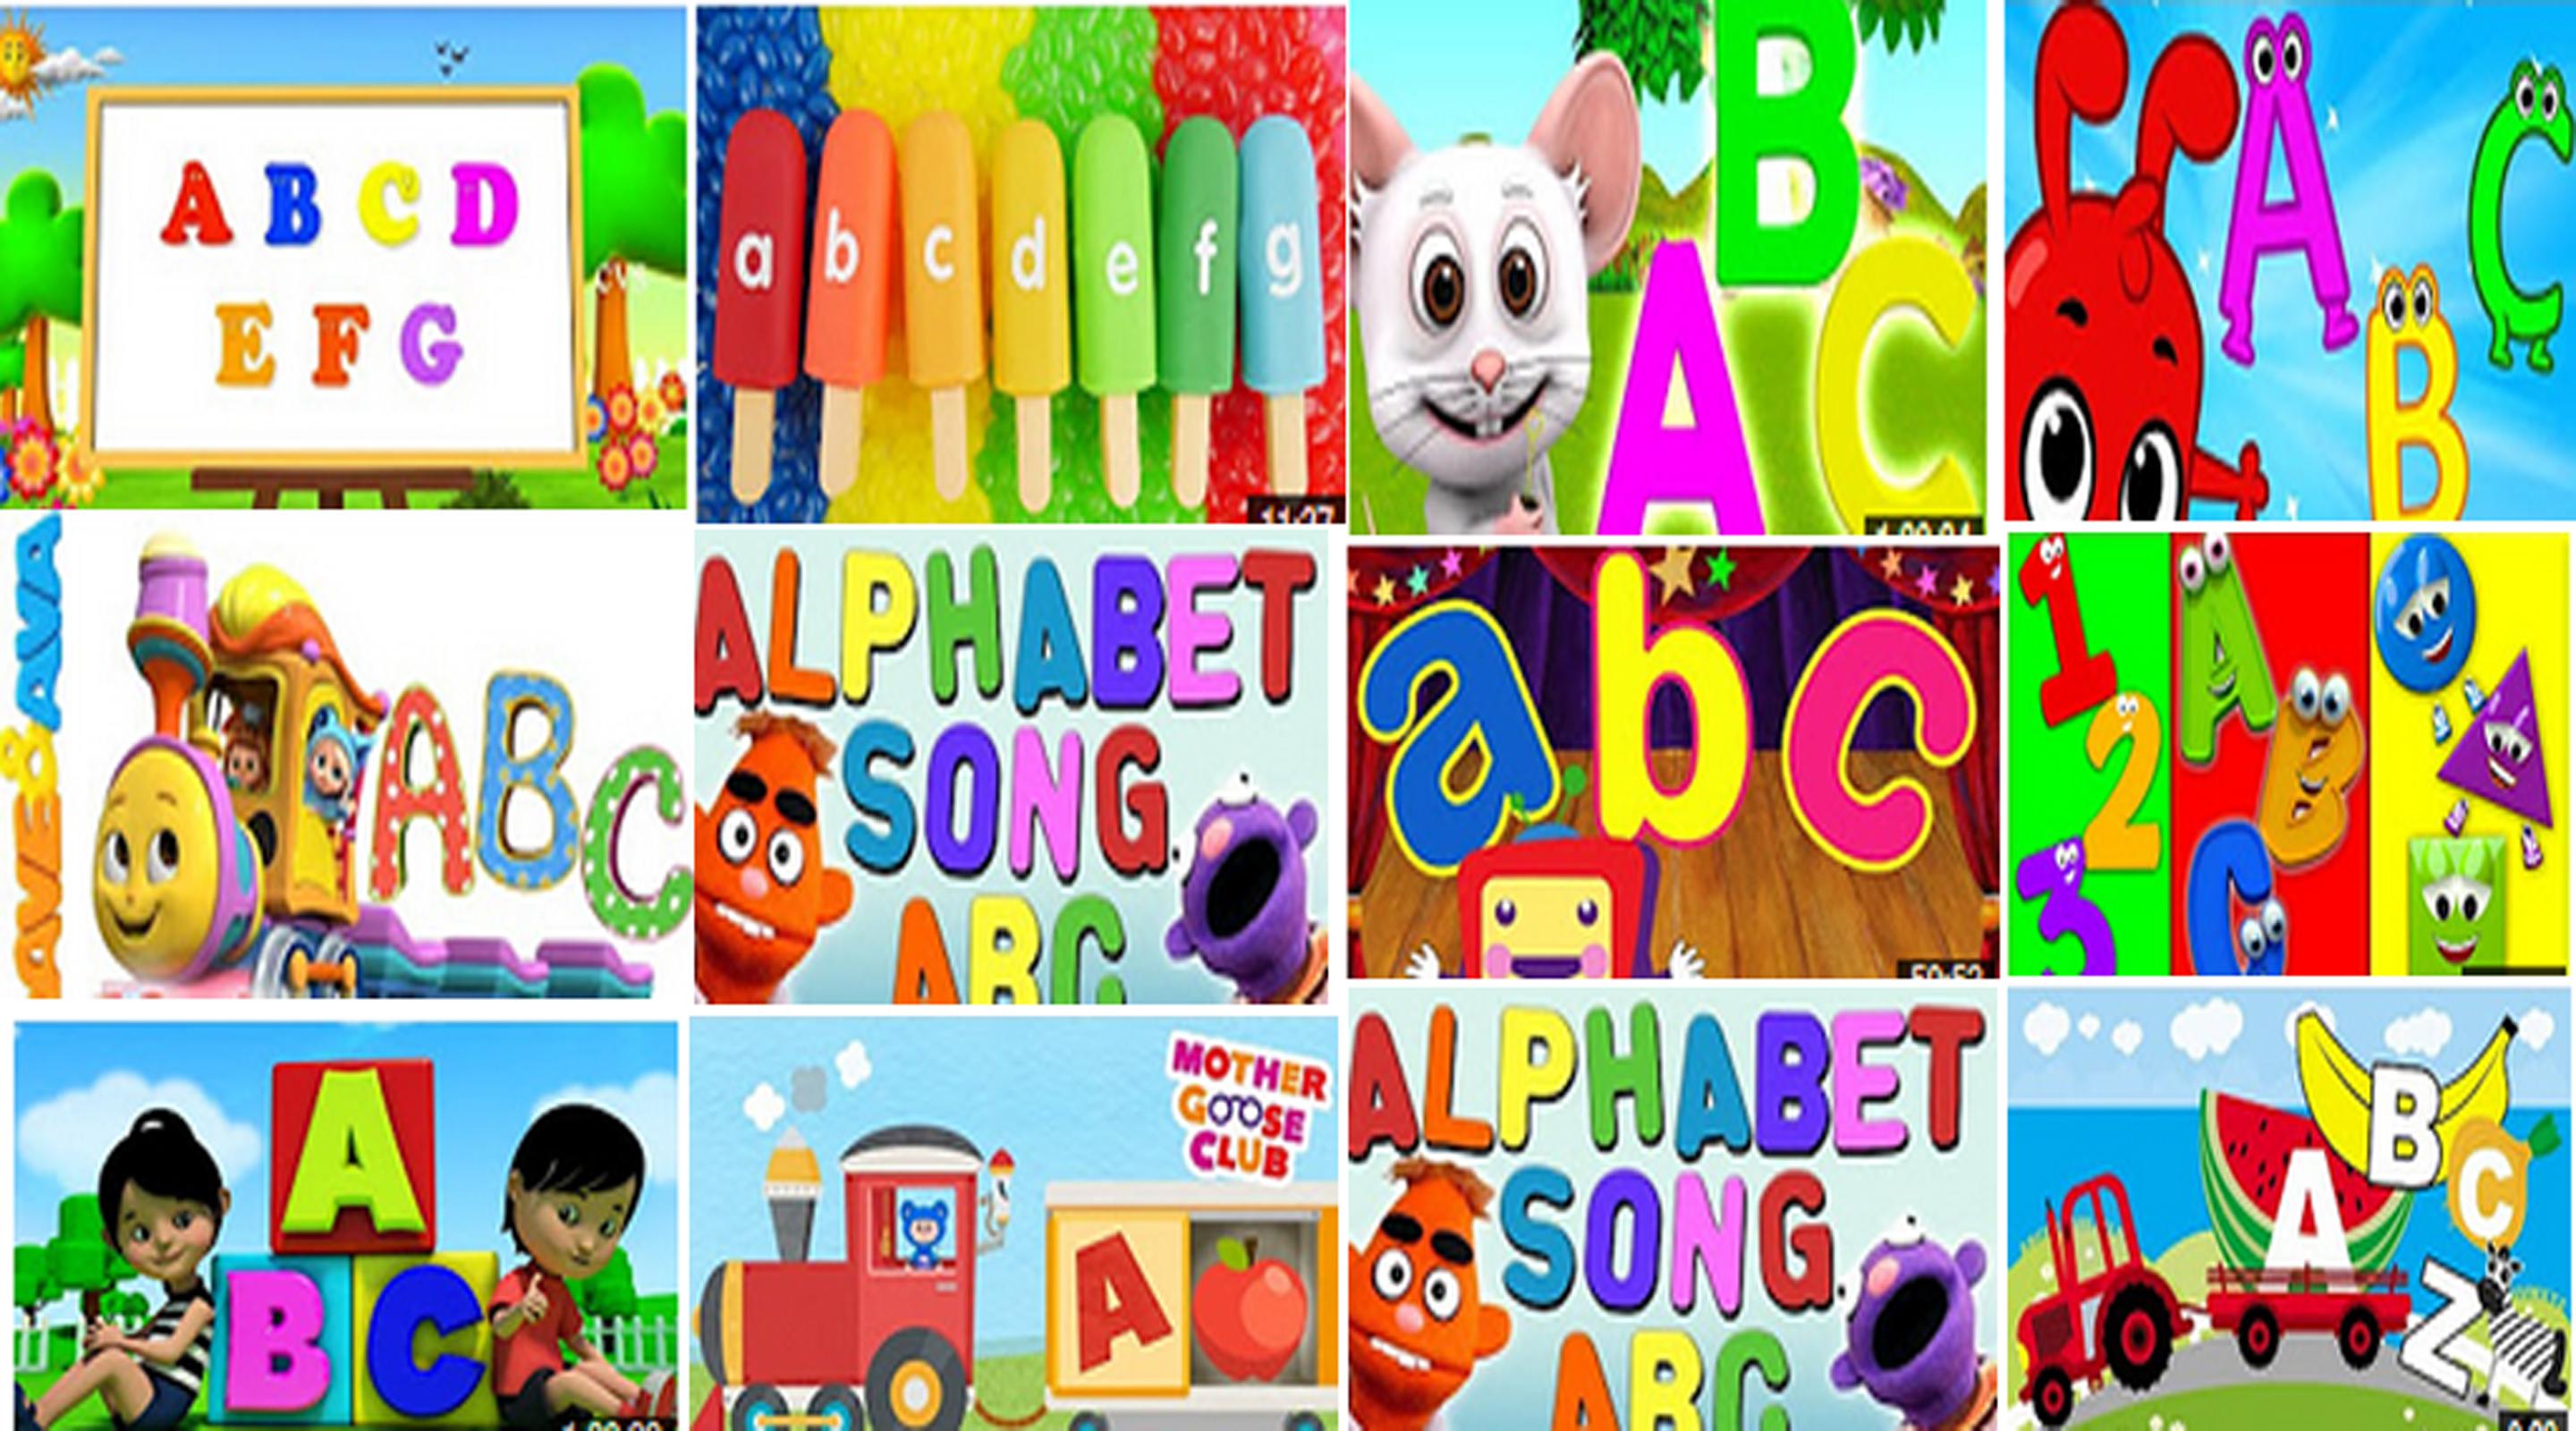 Alphabet Song For Kids for Android - APK Download